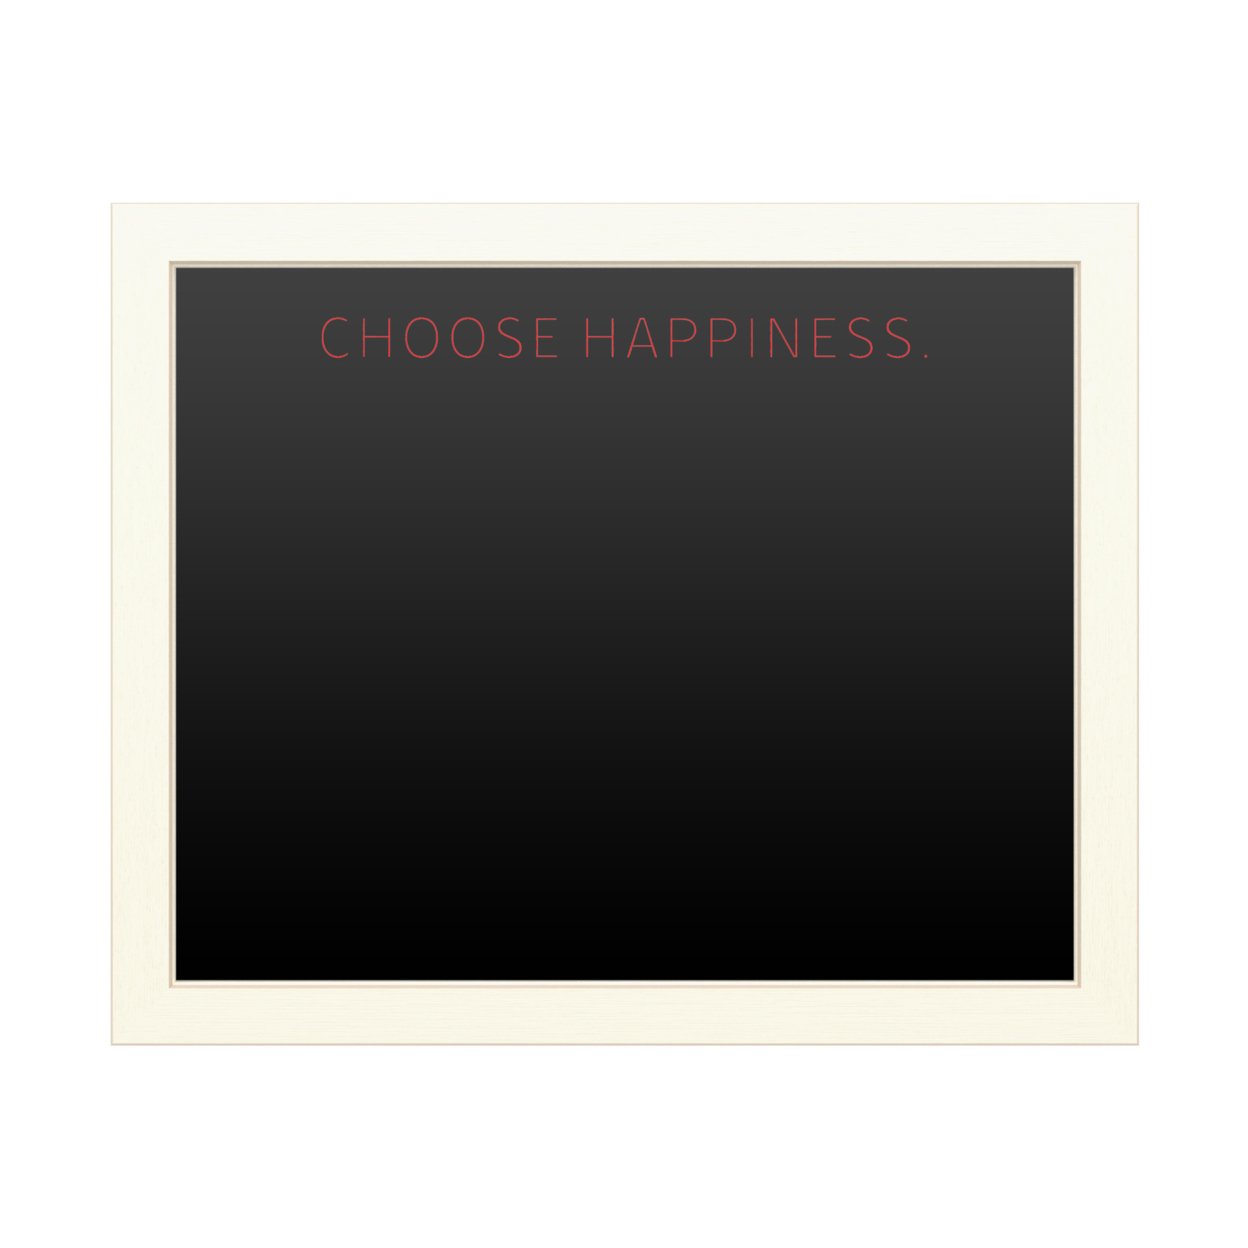 16 X 20 Chalk Board With Printed Artwork - Choose Happiness 2 White Board - Ready To Hang Chalkboard